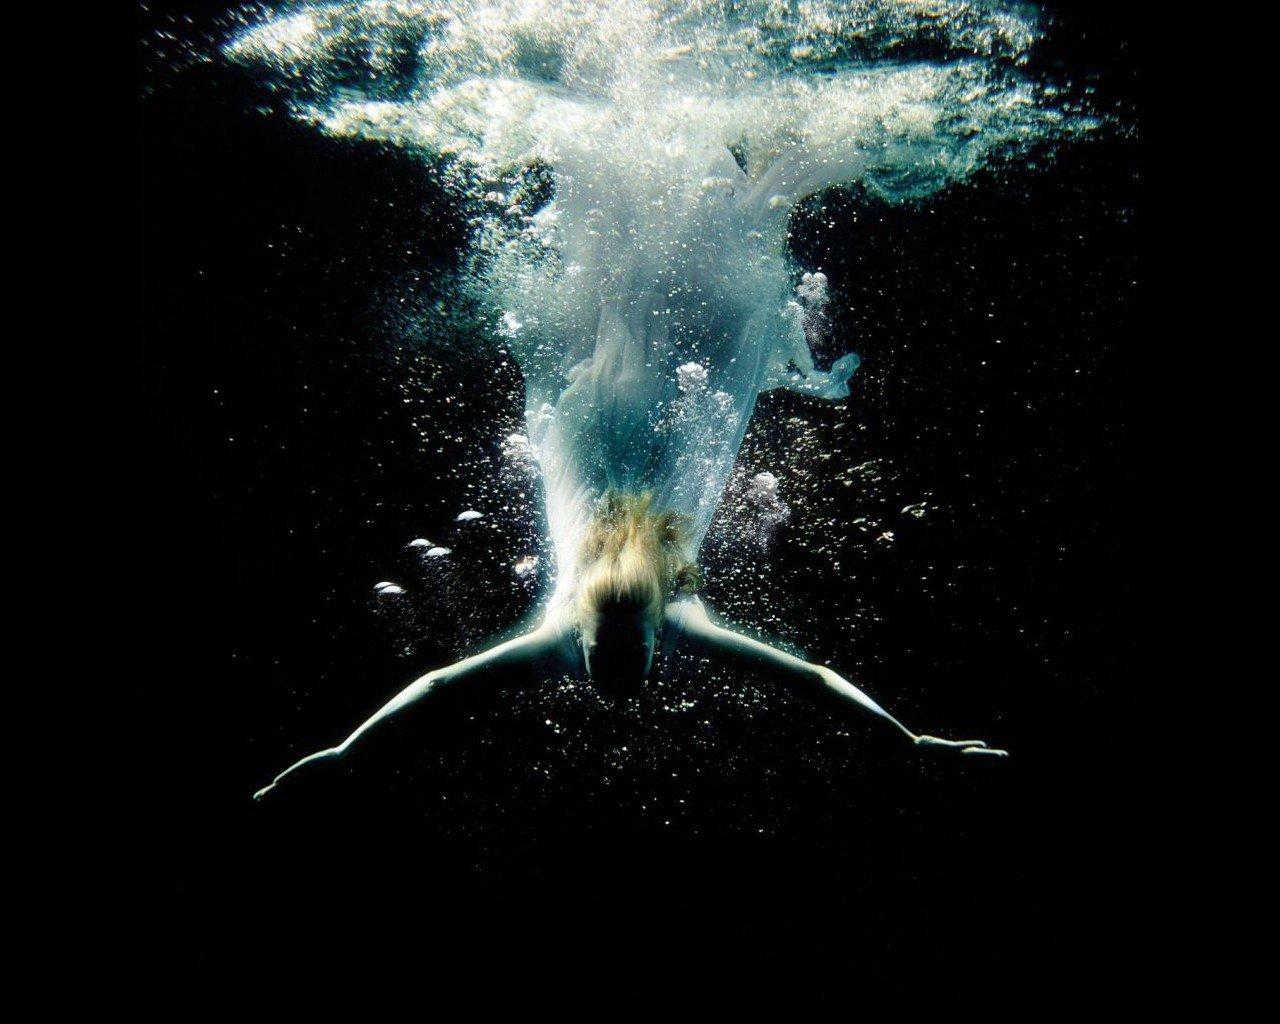 The Chemical Brothers, Album covers, Underwater HD